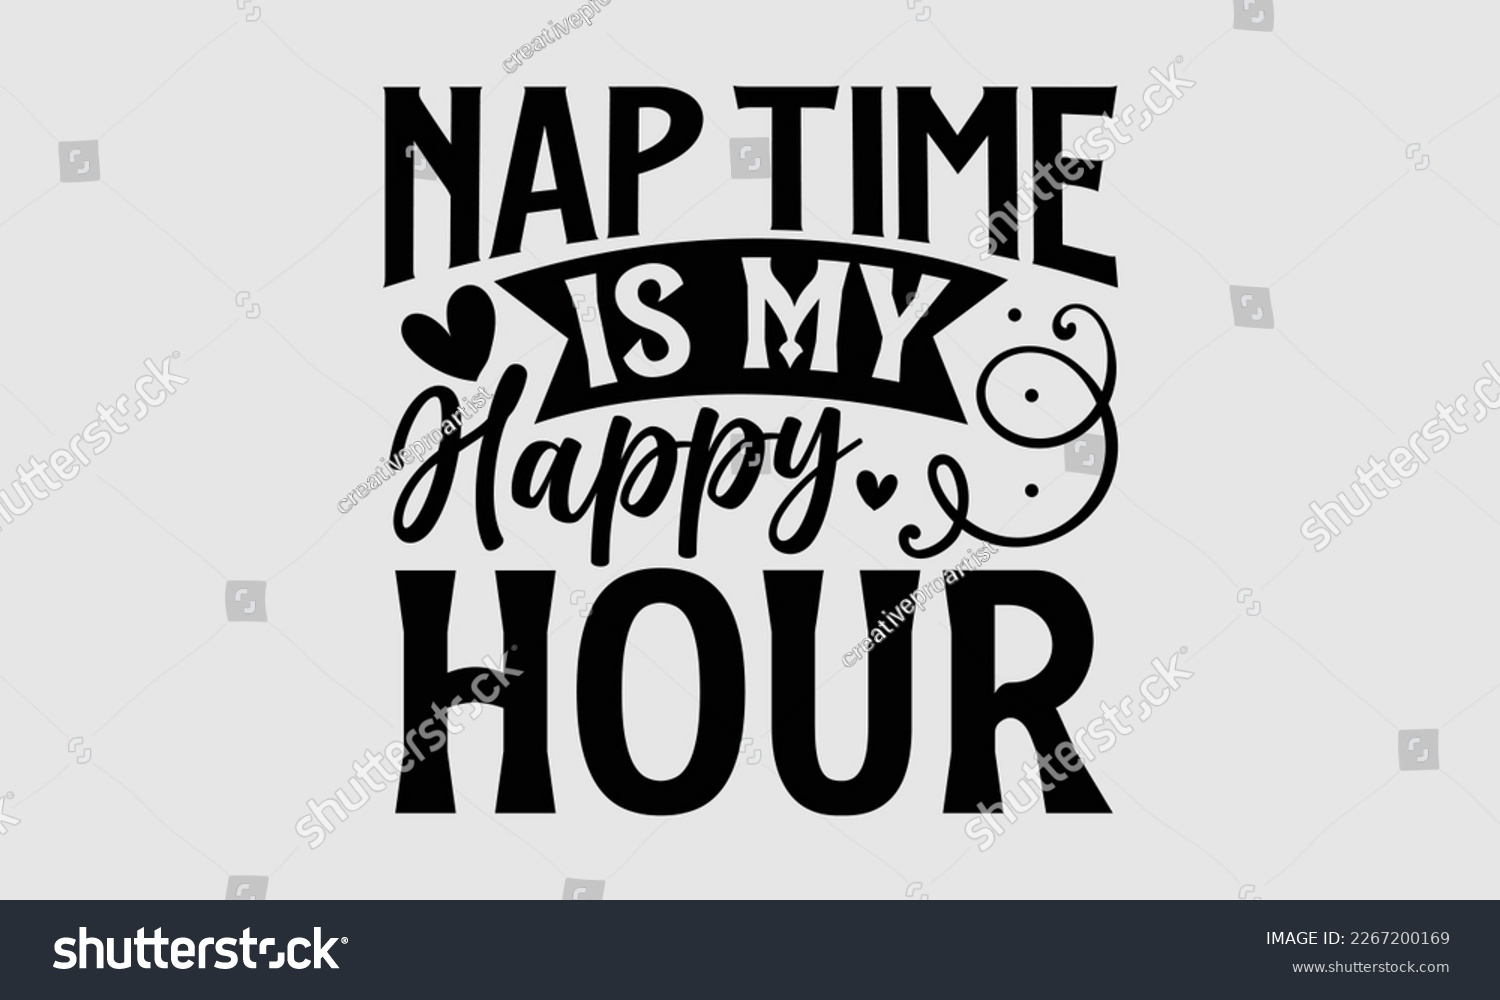 SVG of Nap time is my happy hour- Mother's day t-shirt and svg design, Hand Drawn calligraphy Phrases, greeting cards, mugs, templates, posters, Handwritten Vector, EPS 10. svg